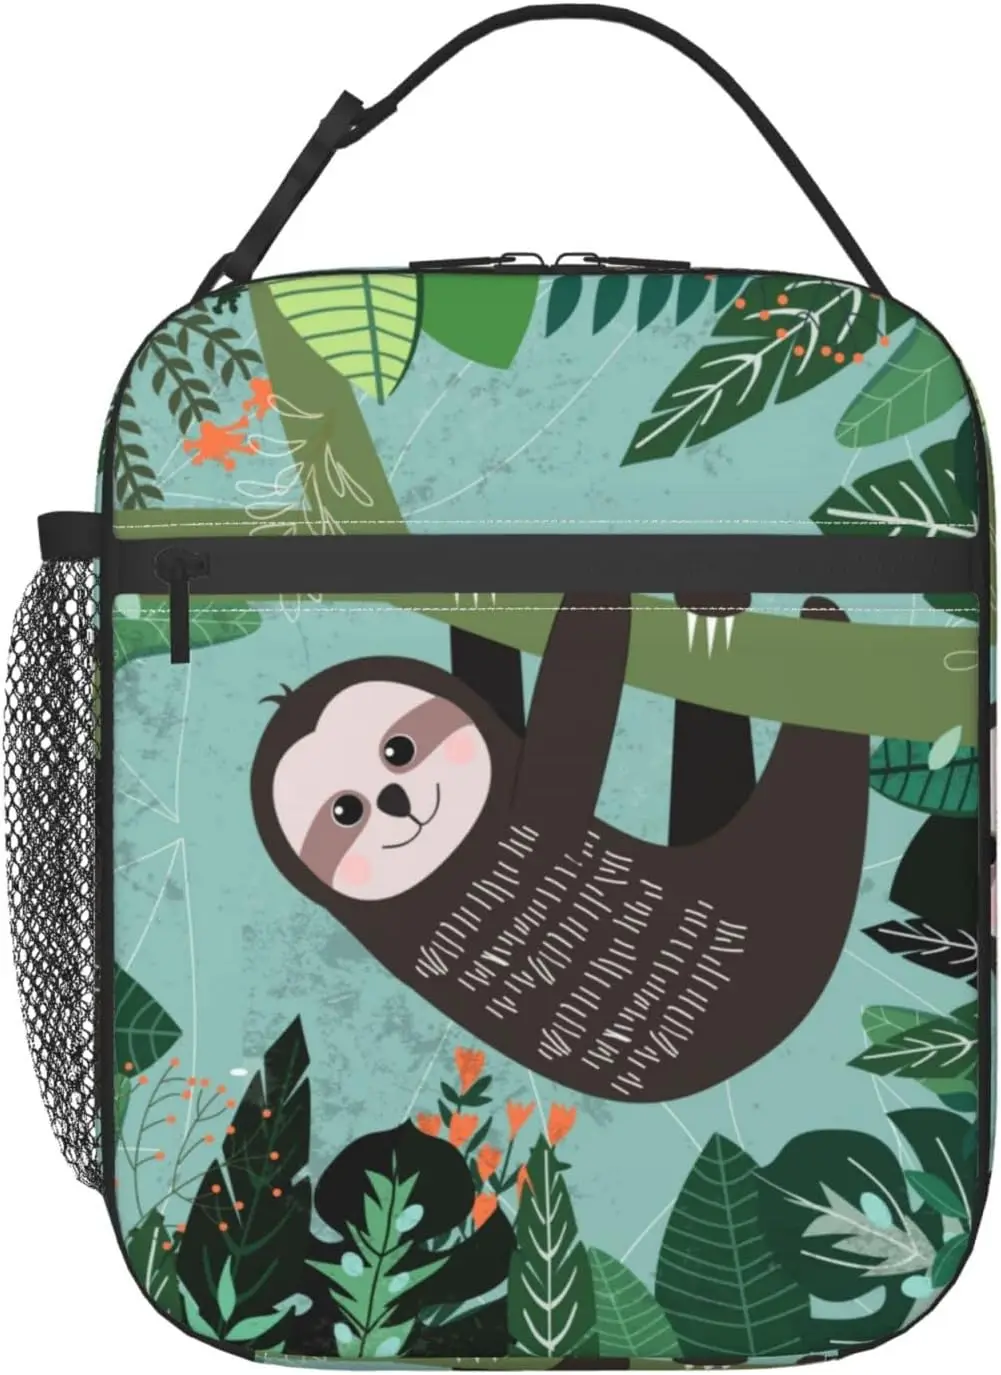 

Tropical Leave Sloth Insulated Lunch Box, Portable Reusable Lunch Bag Cooler Tote for Boys Girls Women Men Picnic Travel